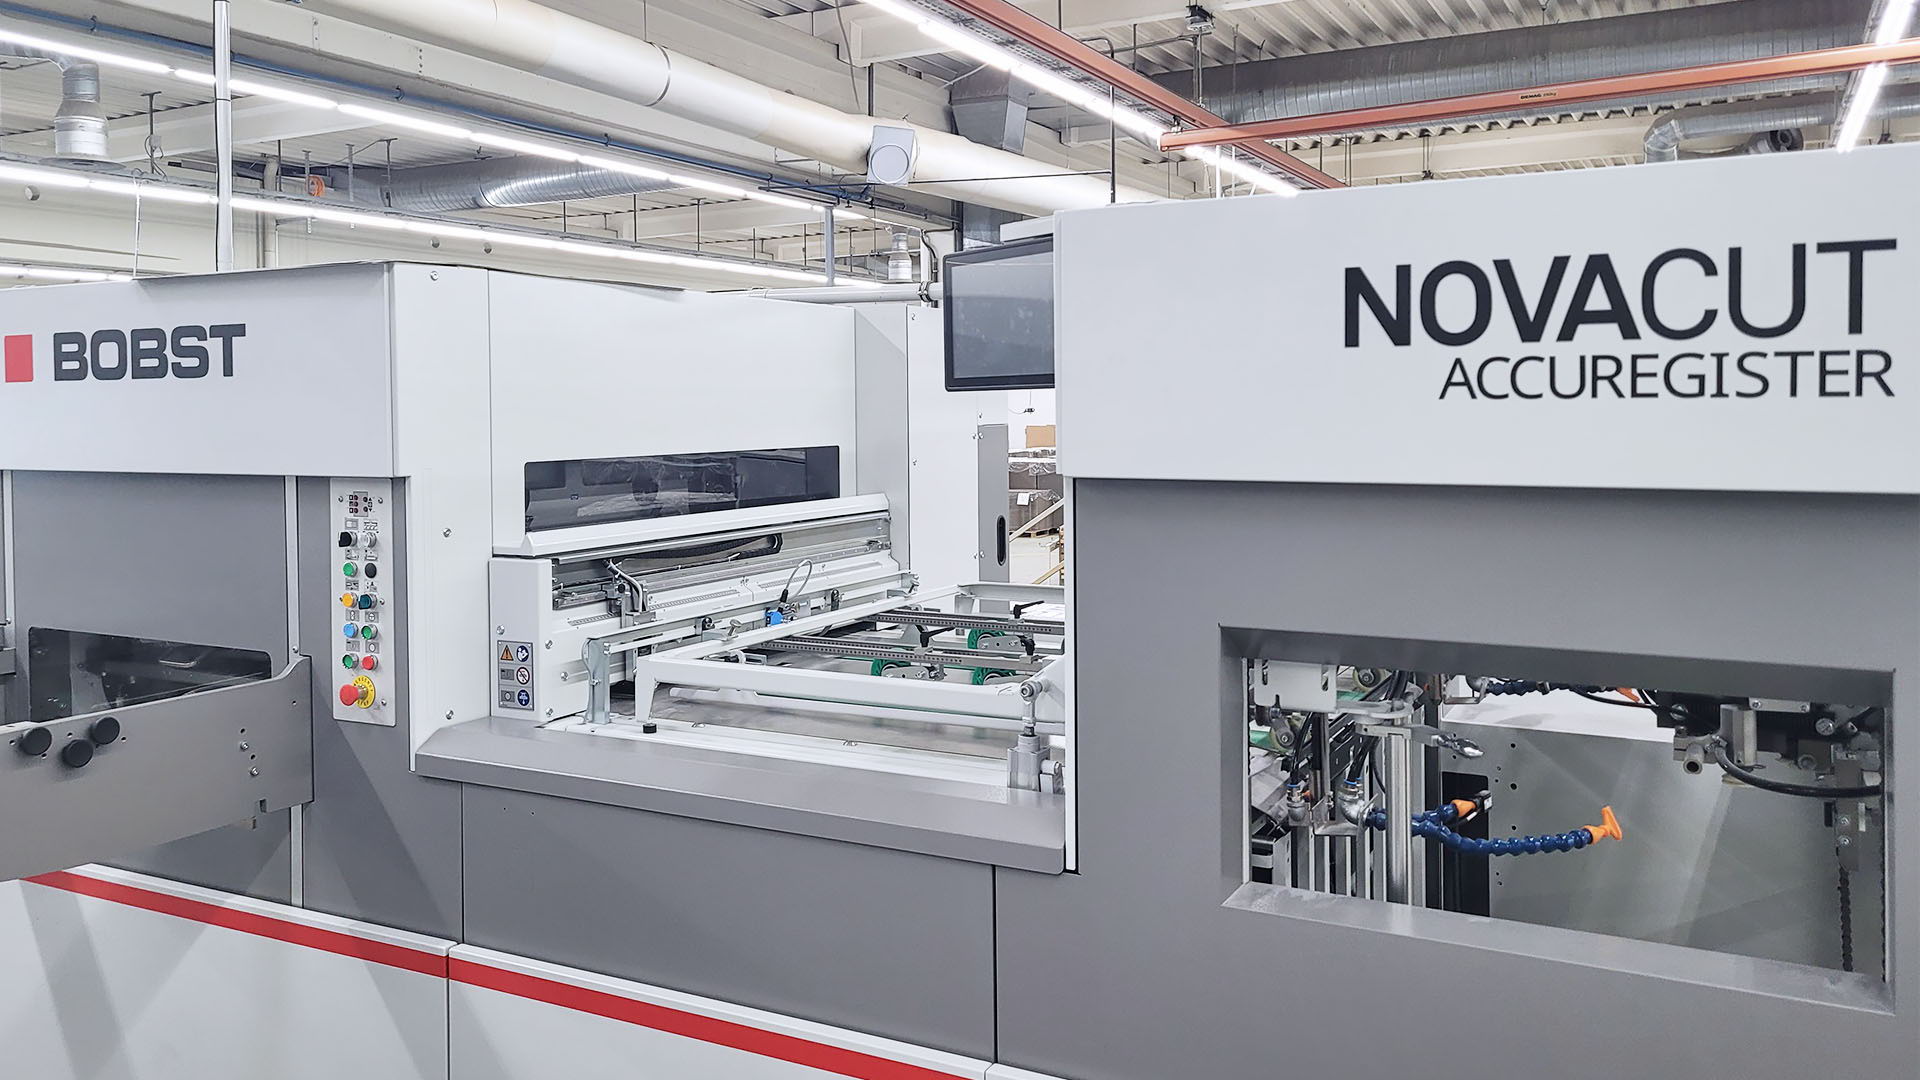 The ‘contactless’ ACCUREGISTER register system of its BOBST NOVACUT 106 ER flat-bed cutter-creaser allows Höhn Display + Packaging a great deal of flexibility for processing a wide range of materials. With the cut-to-print registers, even print tolerances are compensated.